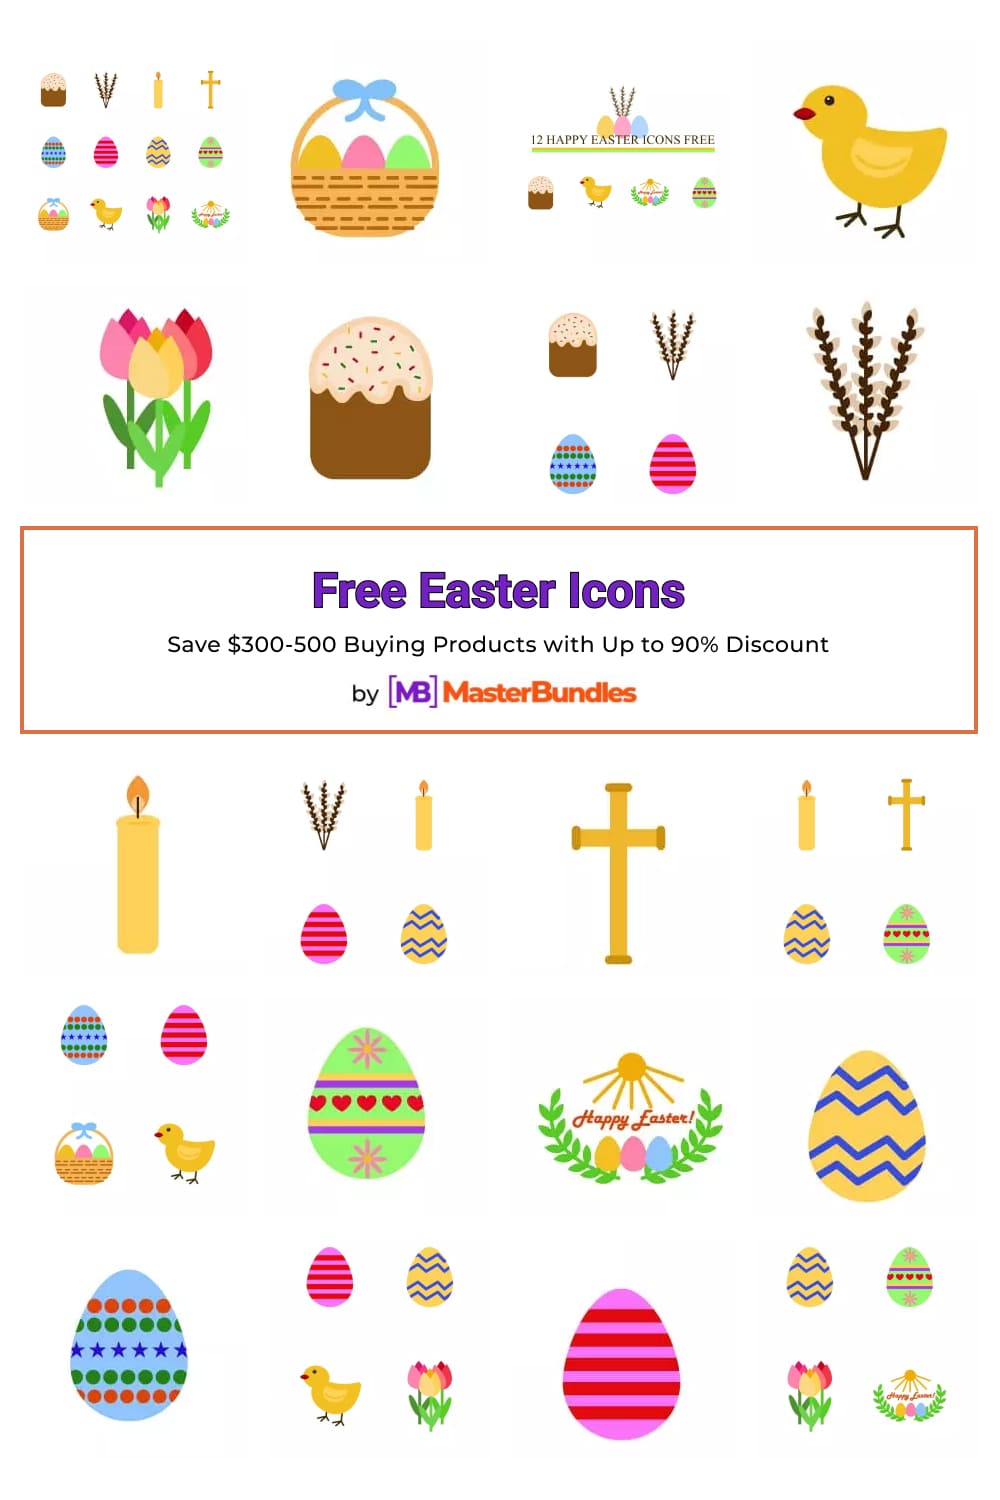 Free Easter Icons Pinterest image.